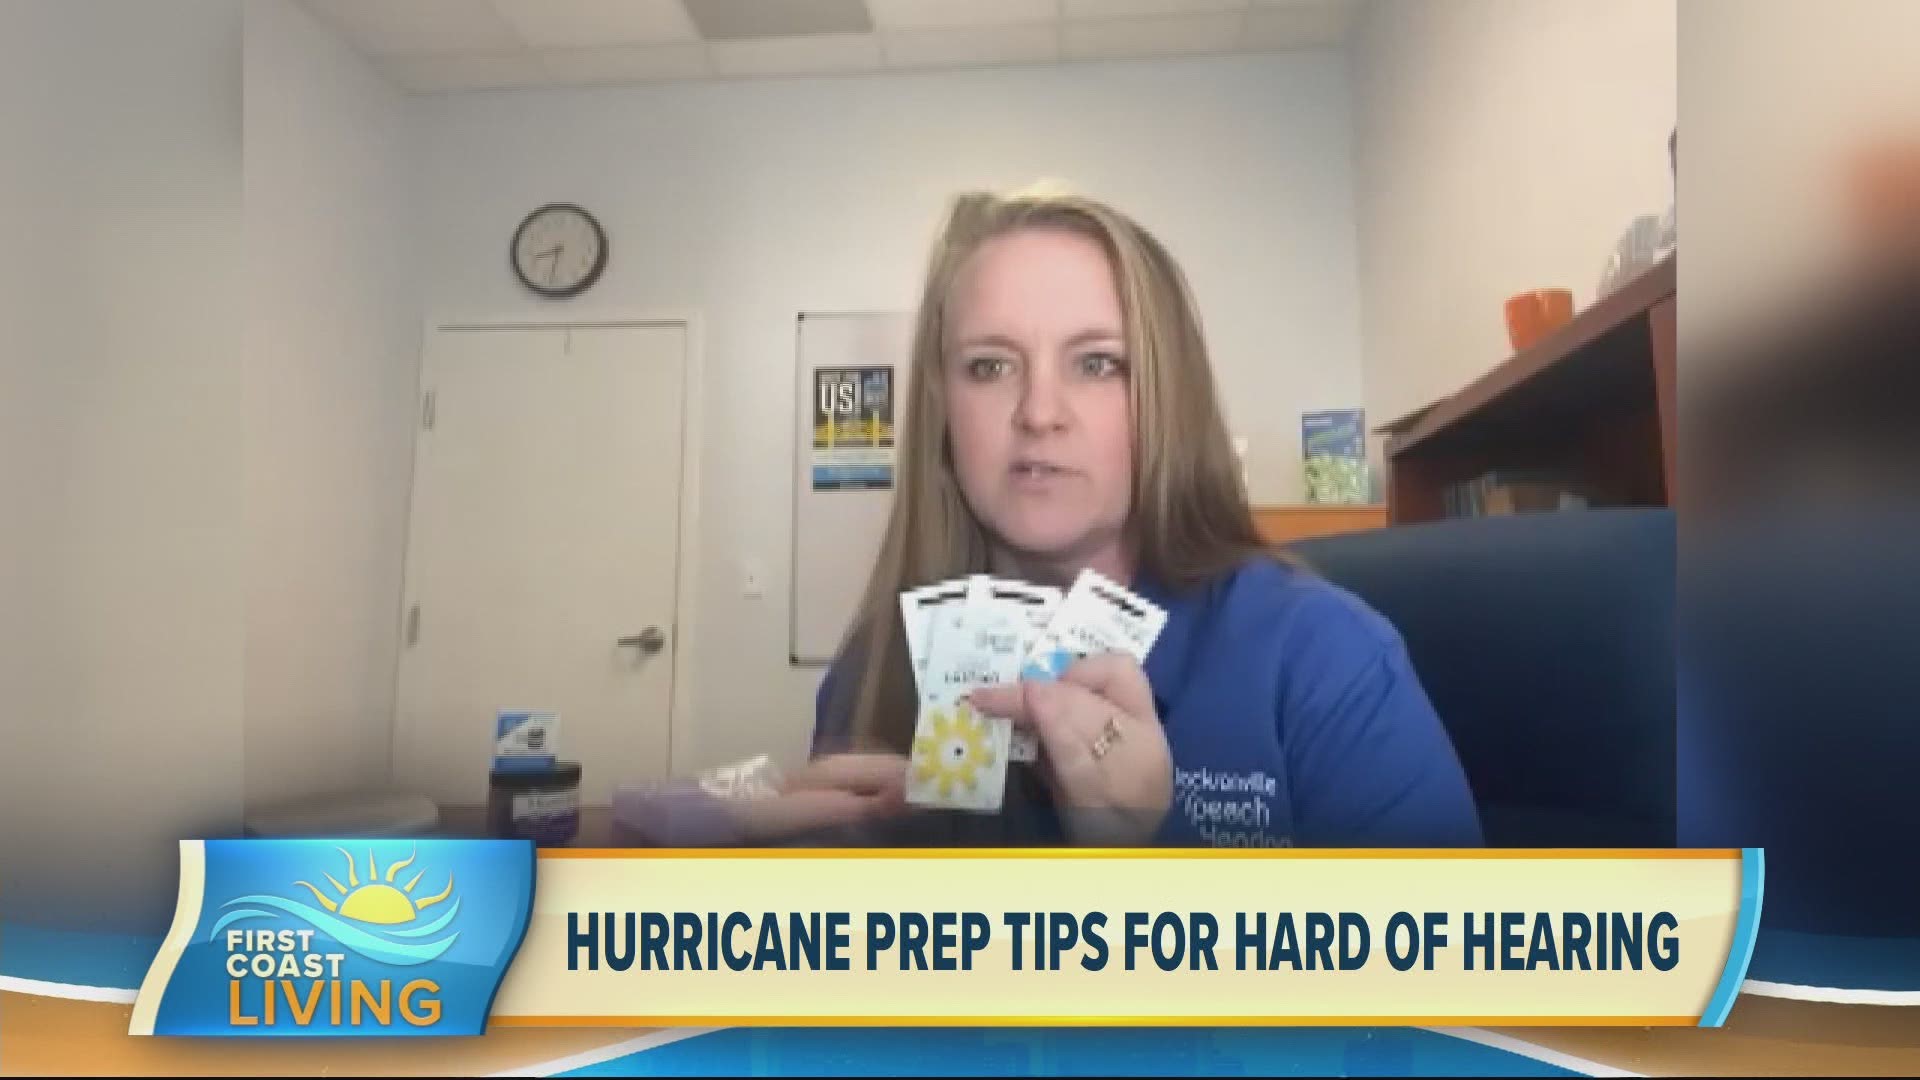 Hurricane tips for those caring for or who are hard of hearing